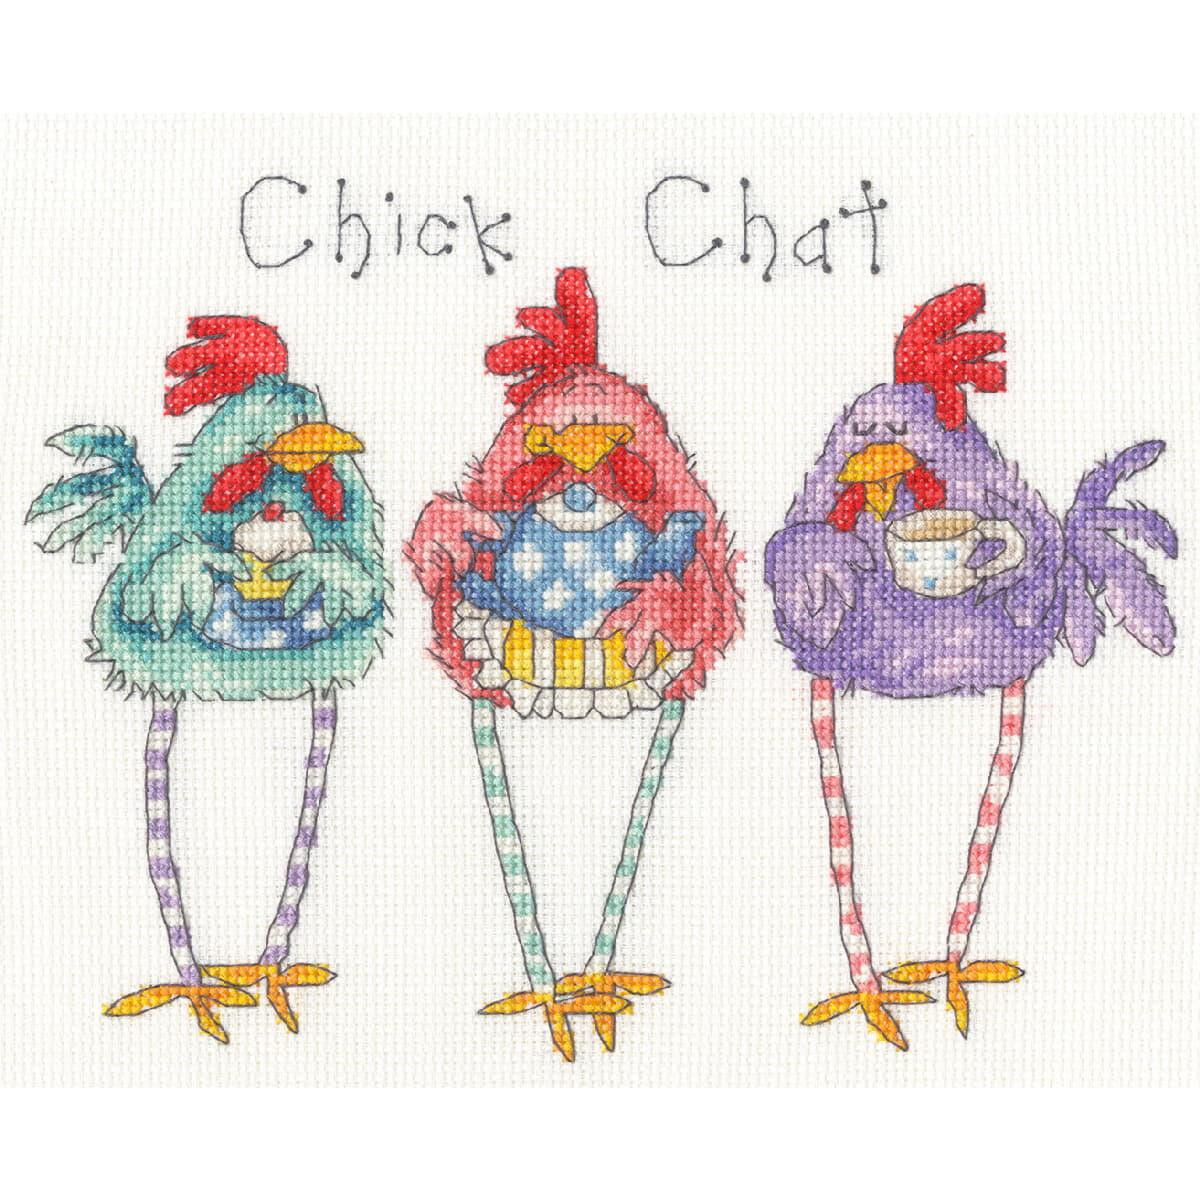 Bothy Threads counted cross stitch kit "Chick...